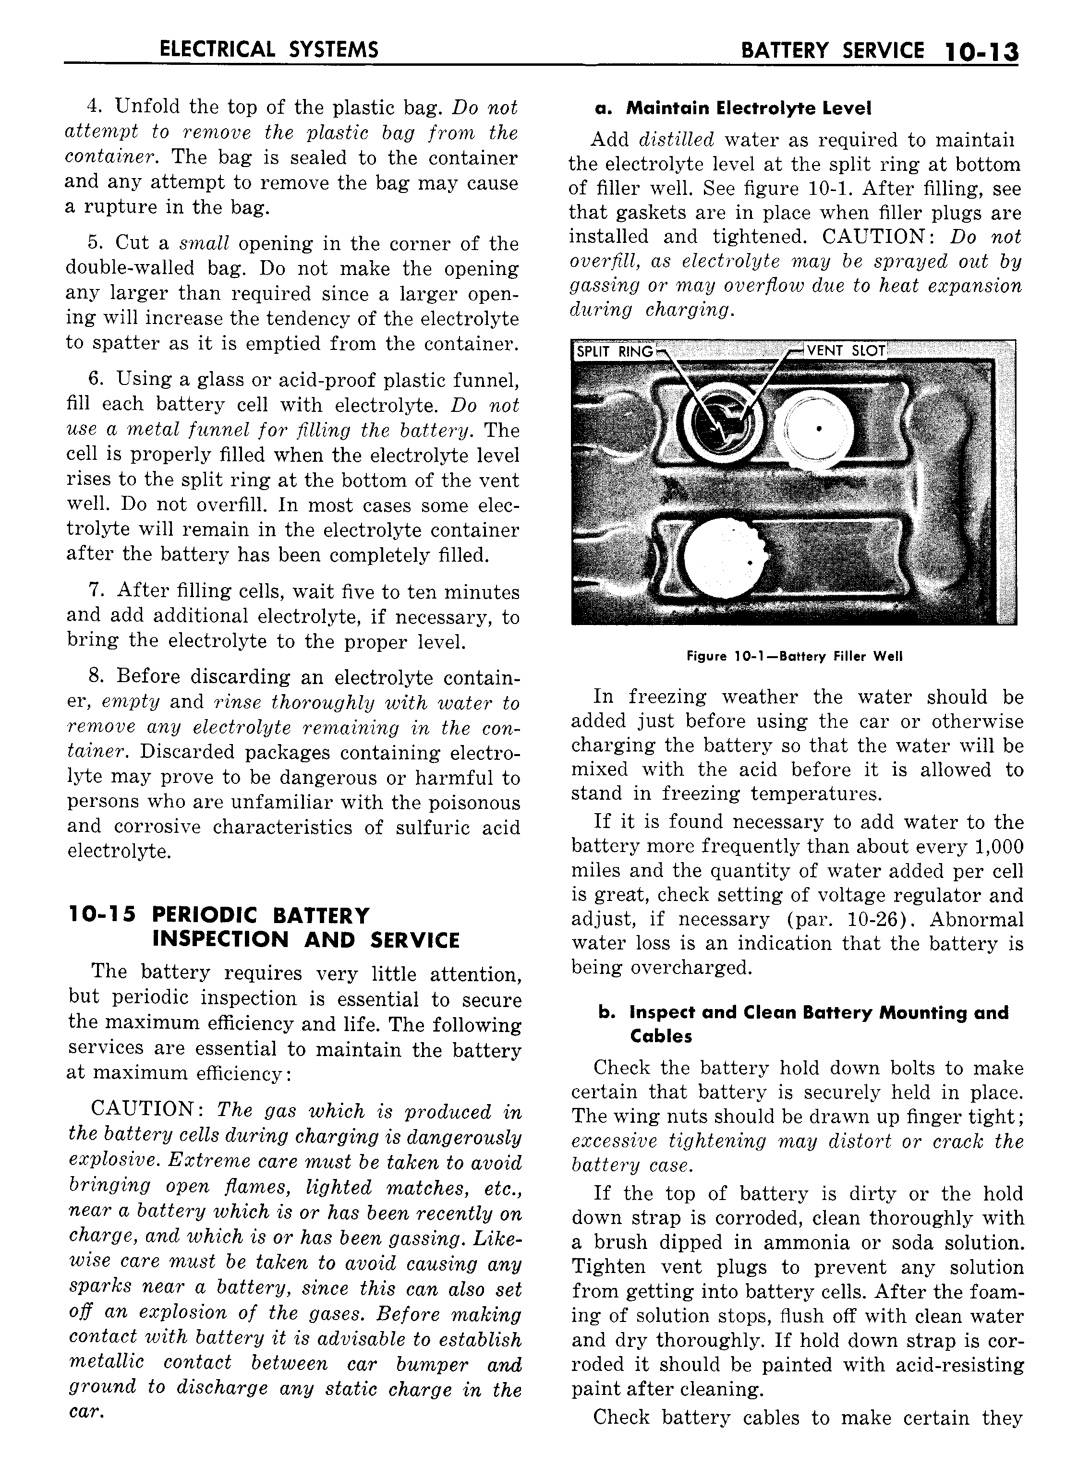 n_11 1957 Buick Shop Manual - Electrical Systems-013-013.jpg